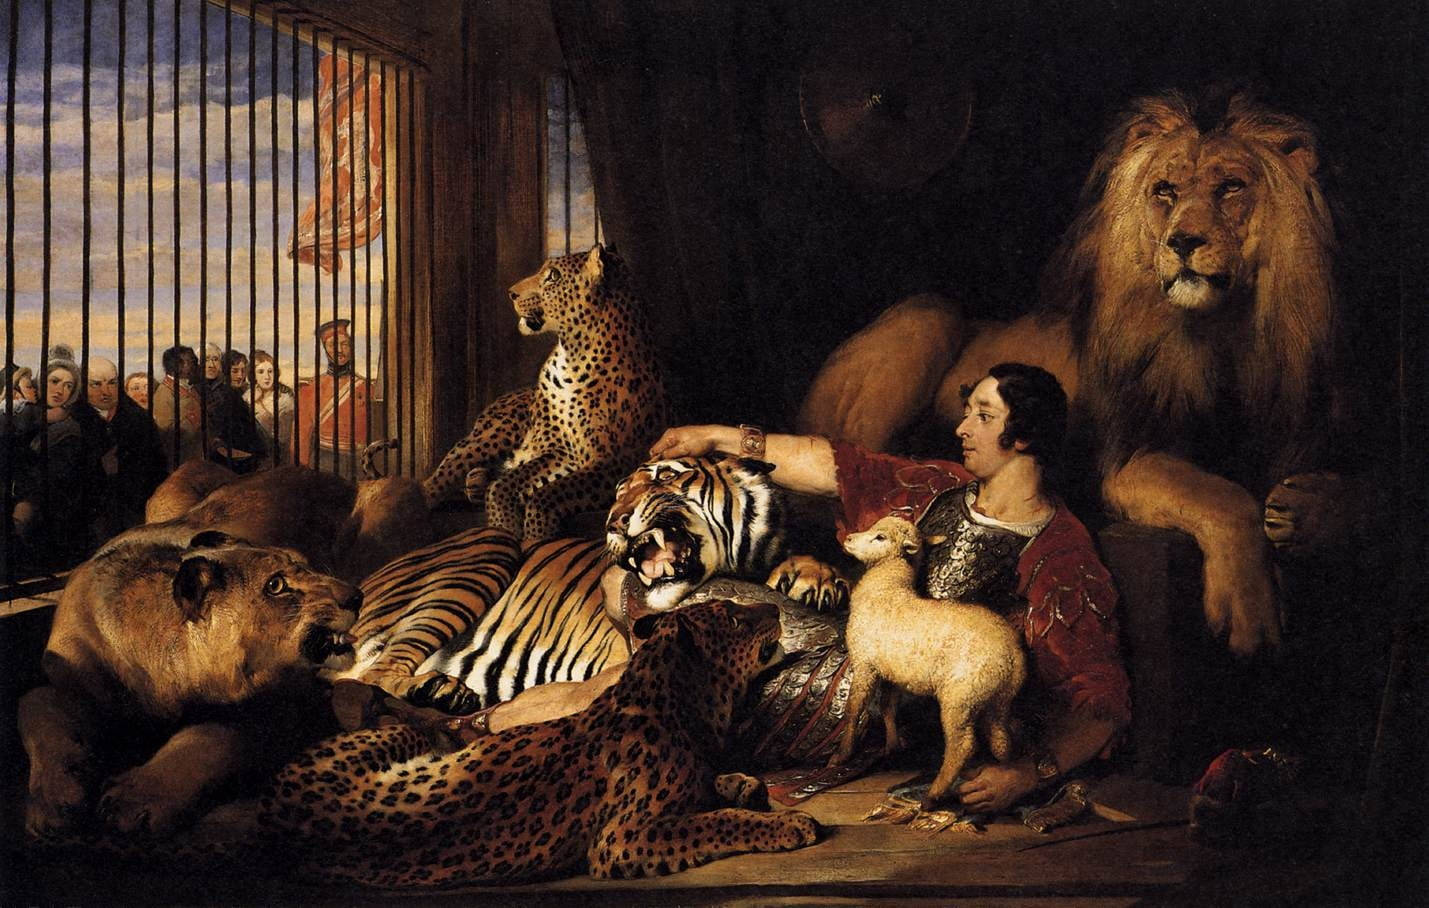 Caged Lion And Tiger Group Painting Background